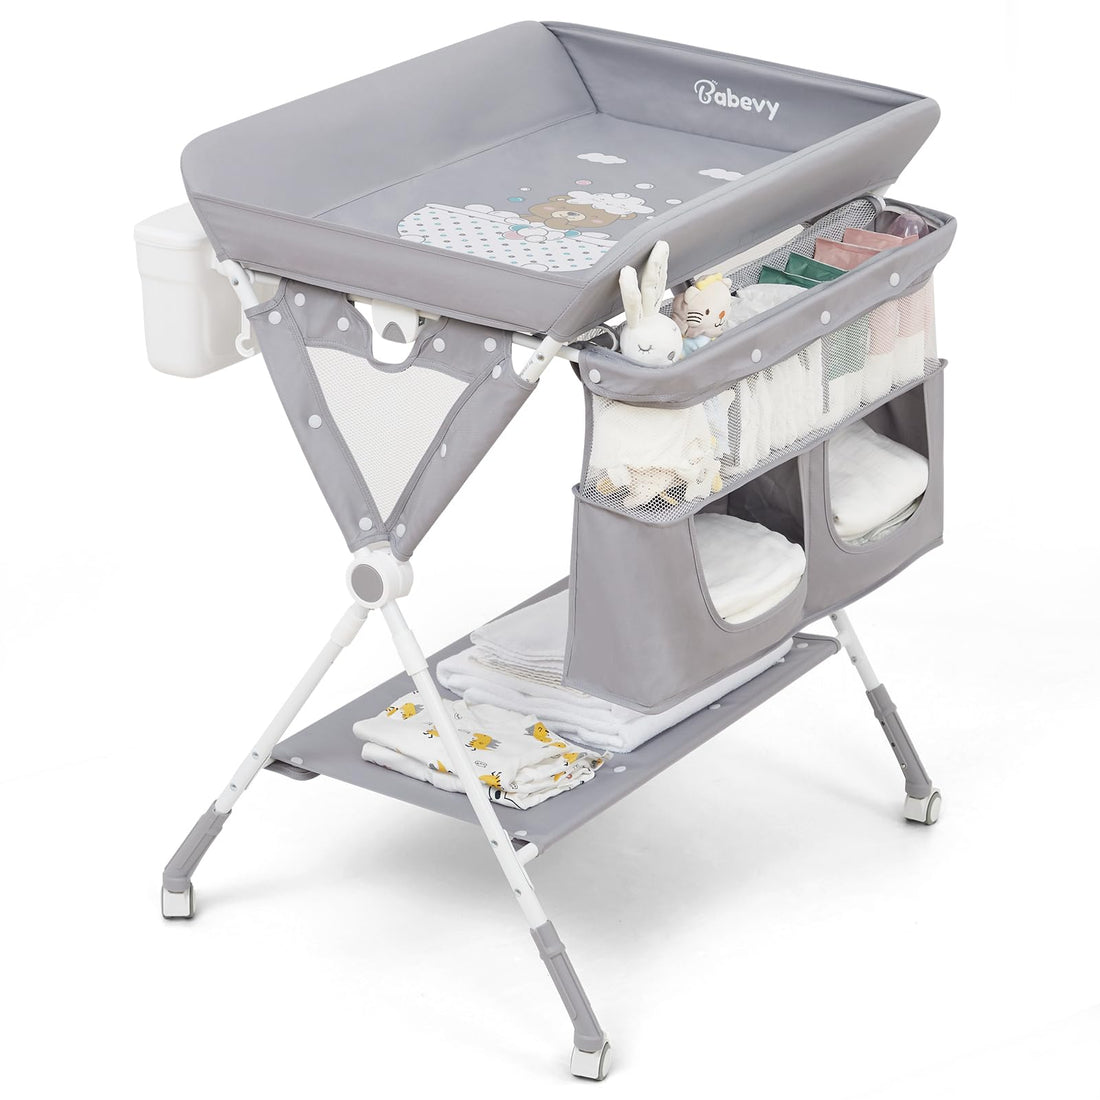 Portable Baby Changing Table, Babevy Foldable Diaper Change Table with Wheels, Adjustable Height, Cleaning Bucket, Changing Station for Infant Mobile Nursery Organizer for Newborn, Light Grey (Copy)